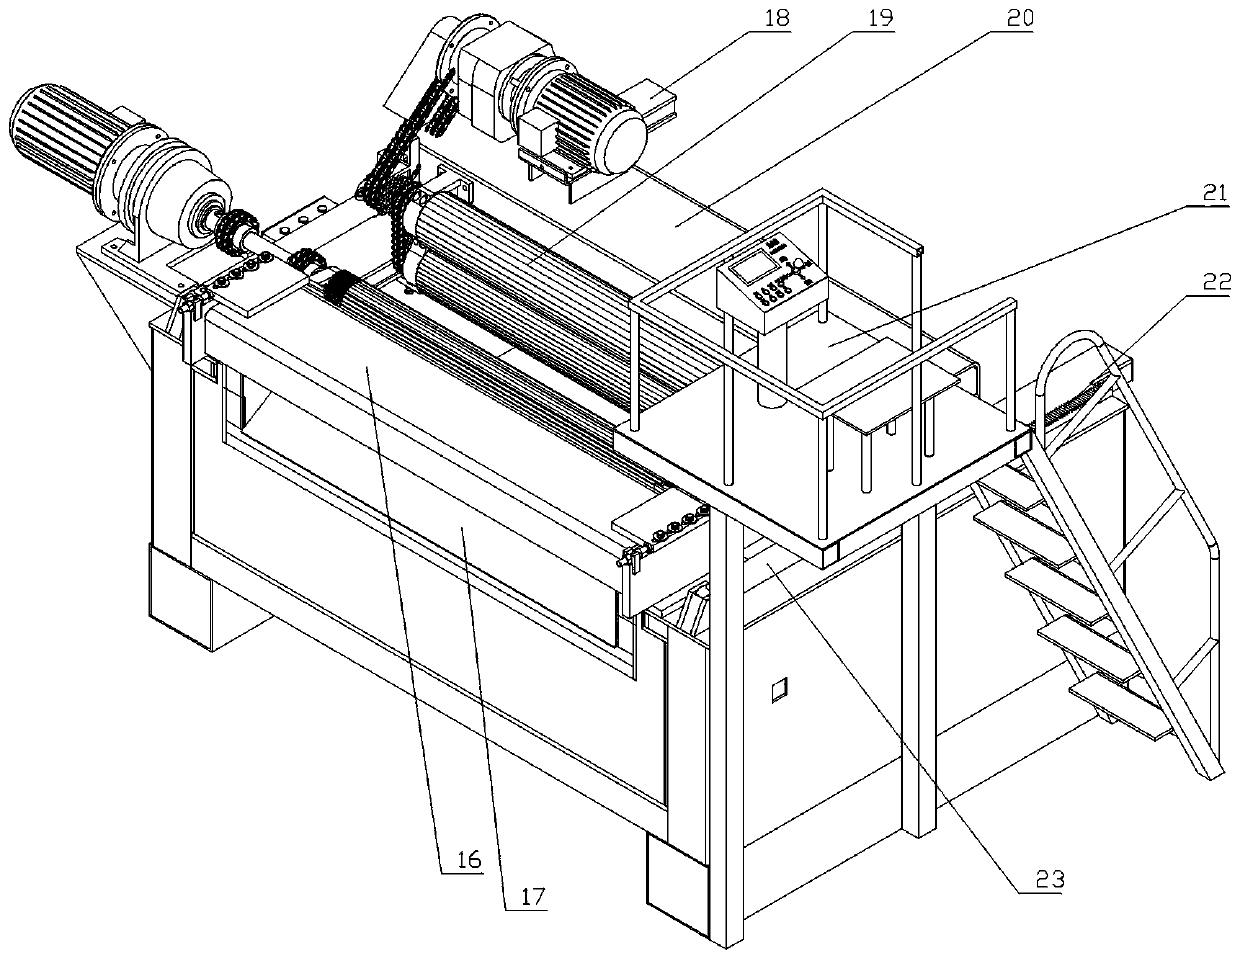 An integrated device for sheet feeding, rotary cutting and stacking